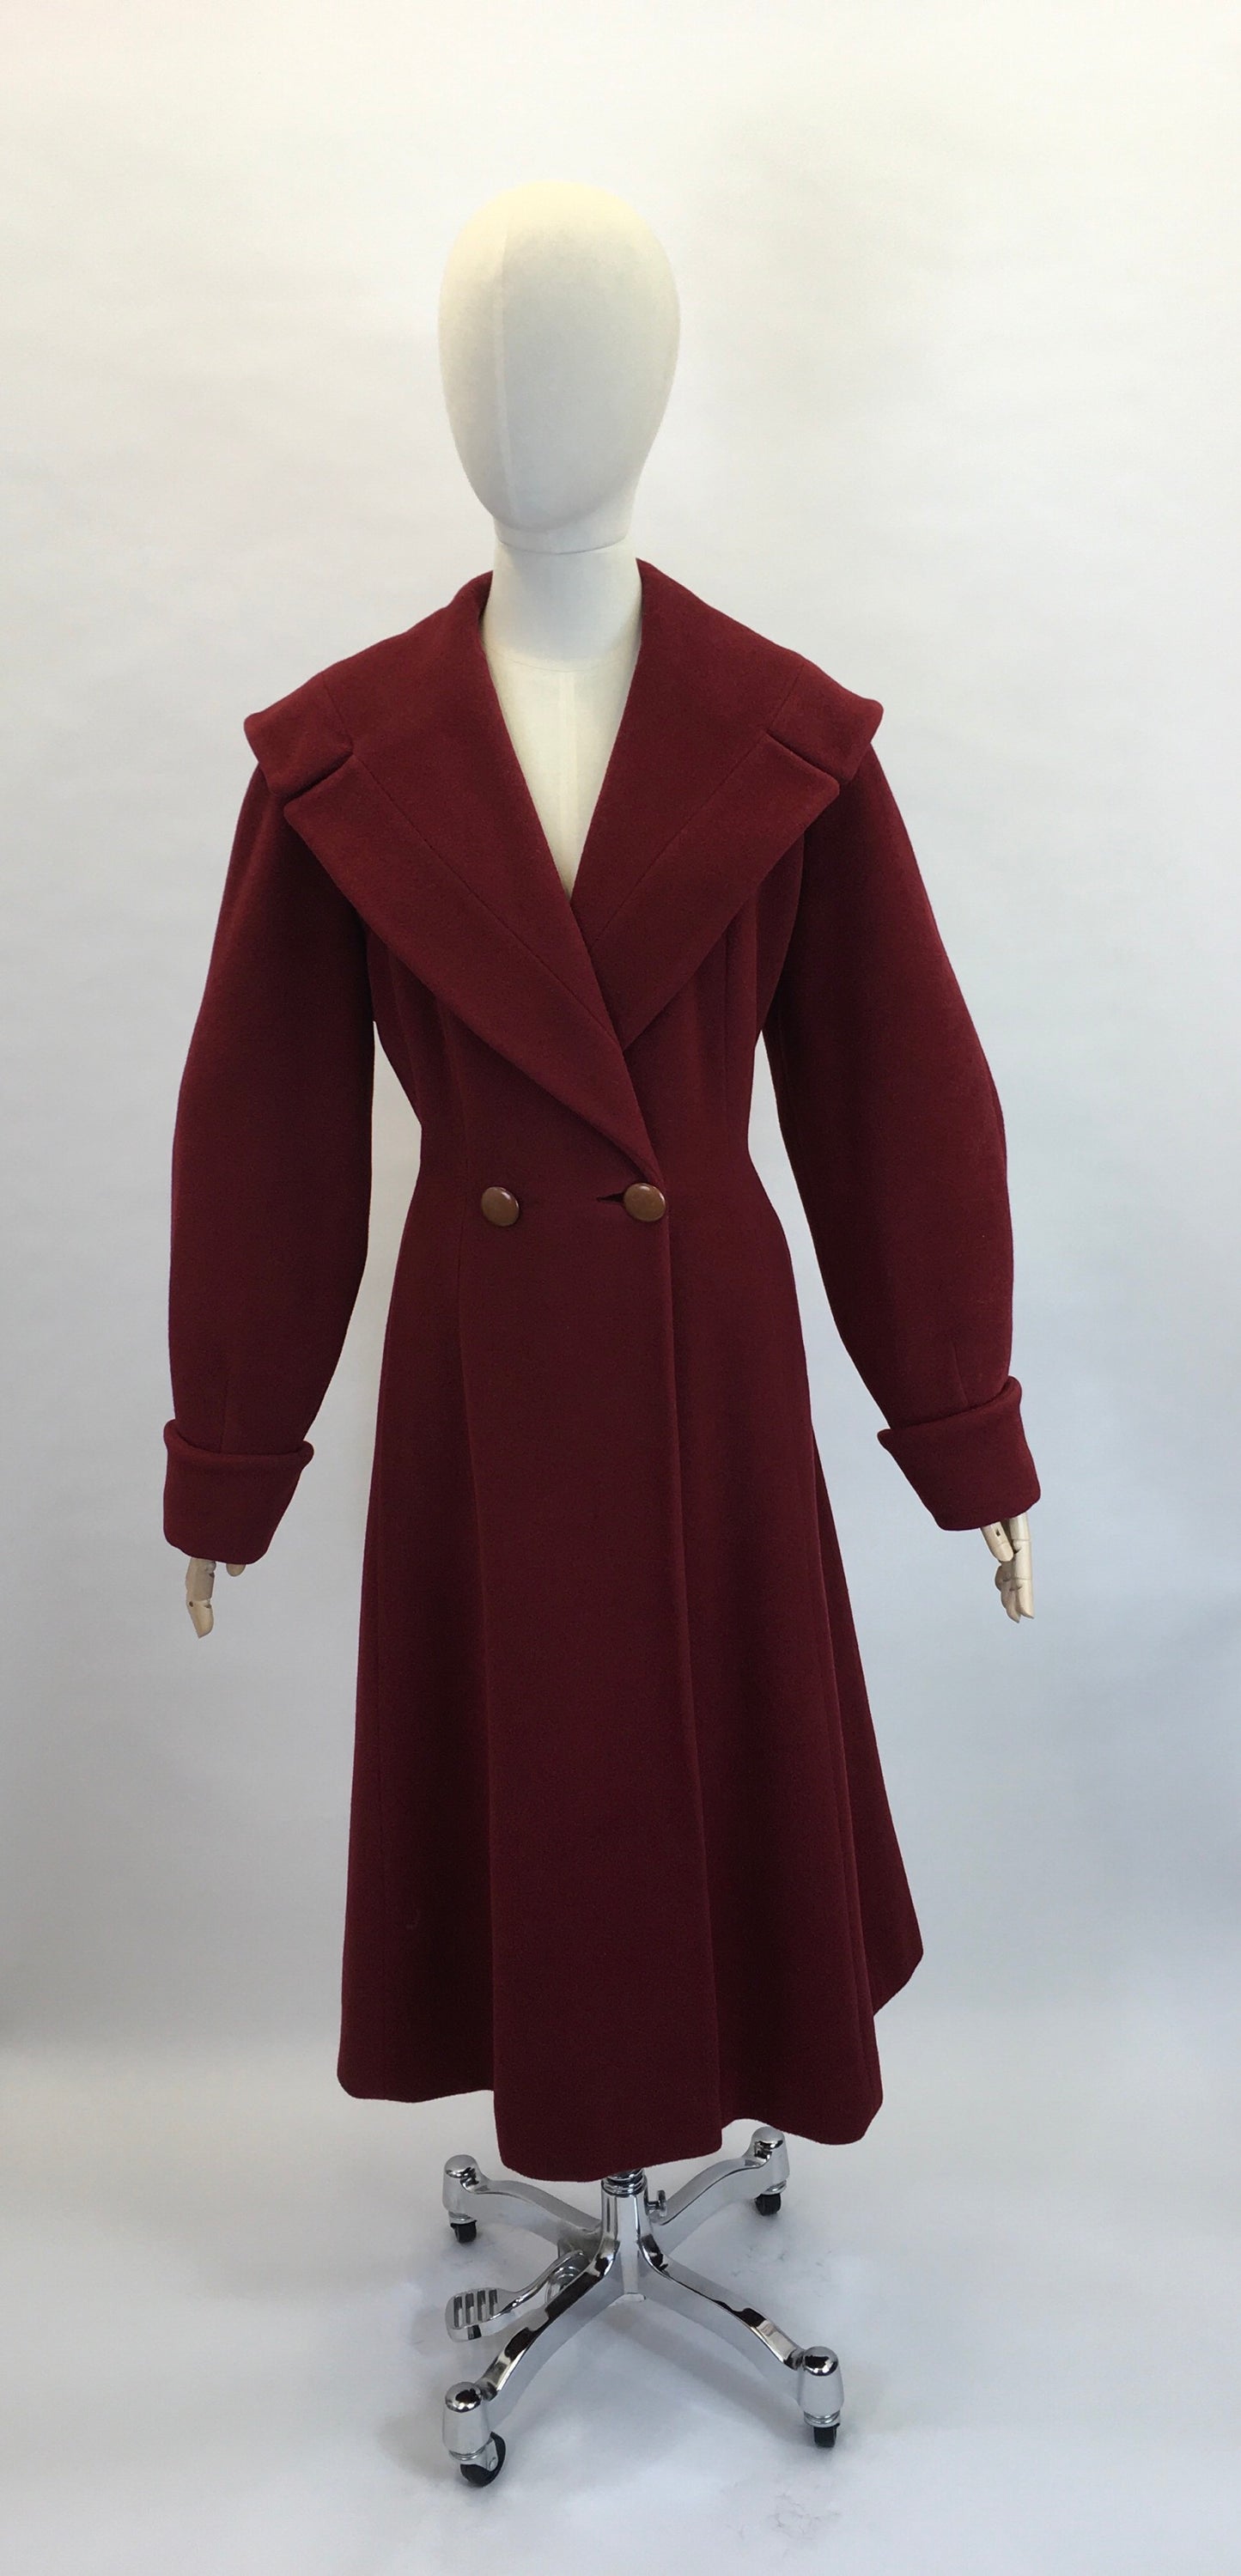 Original 1940’s SENSATIONAL Russet Red Princess Coat - Lovely Shaped Shawl Collar and Cuffs